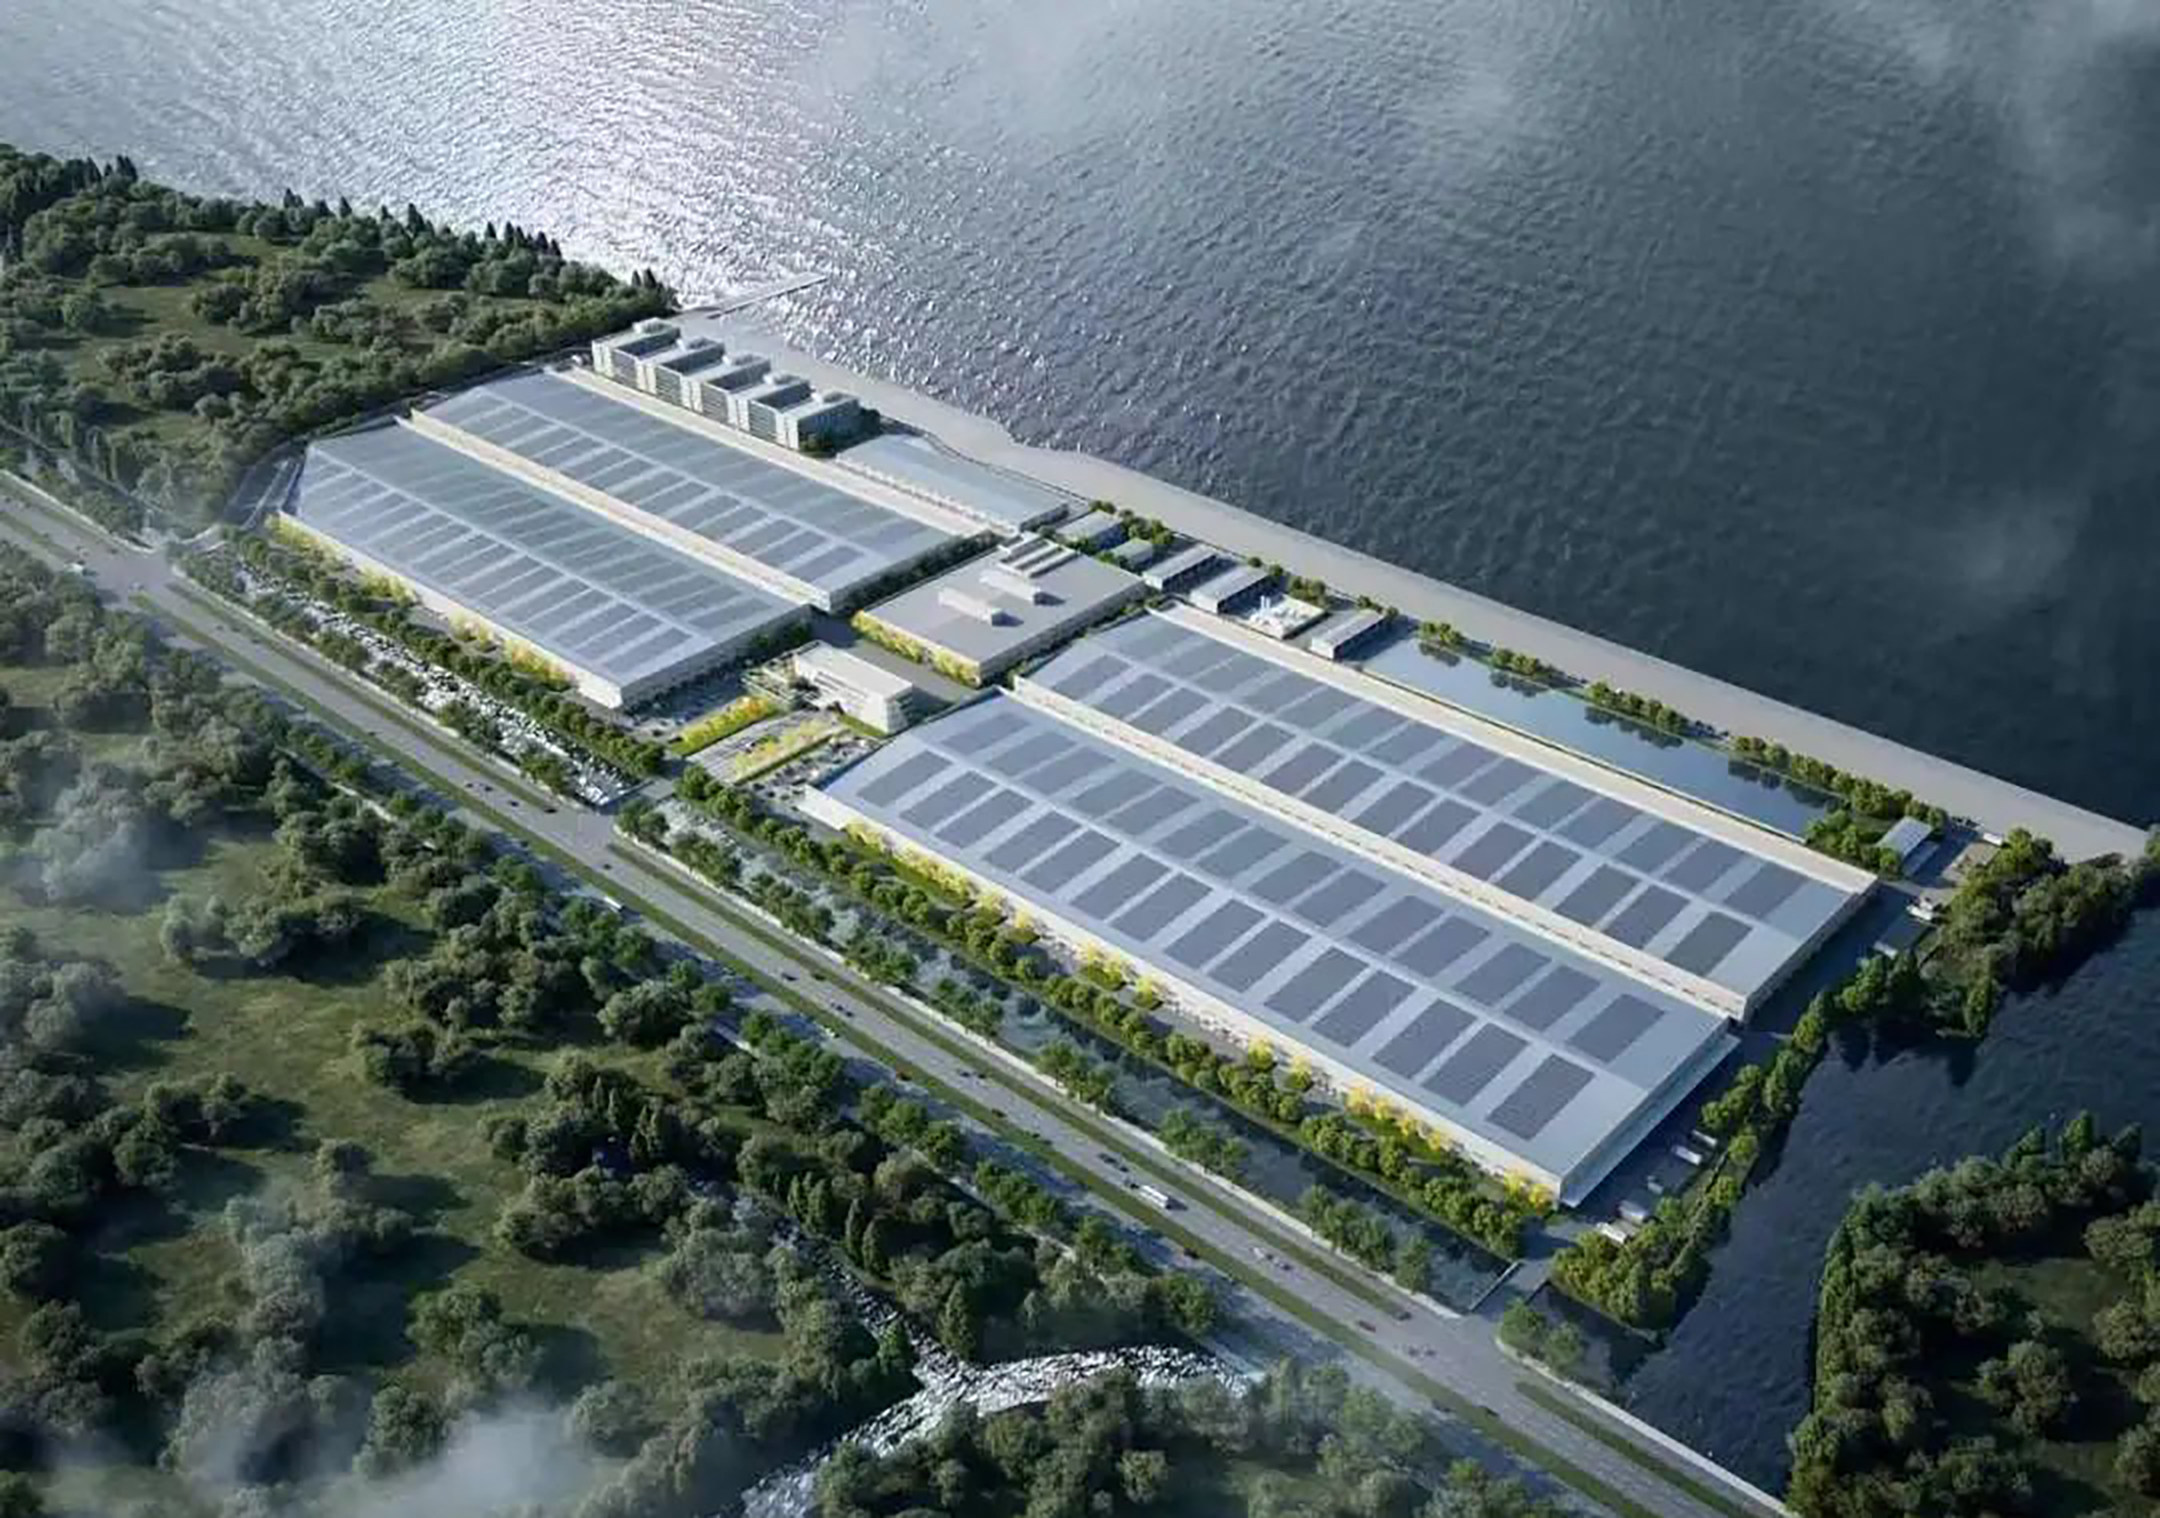 An illustration of a BYD battery plant under construction in Wenzhou, east China’s Zhejian province, and set for operation in 2024. Photo: Handout